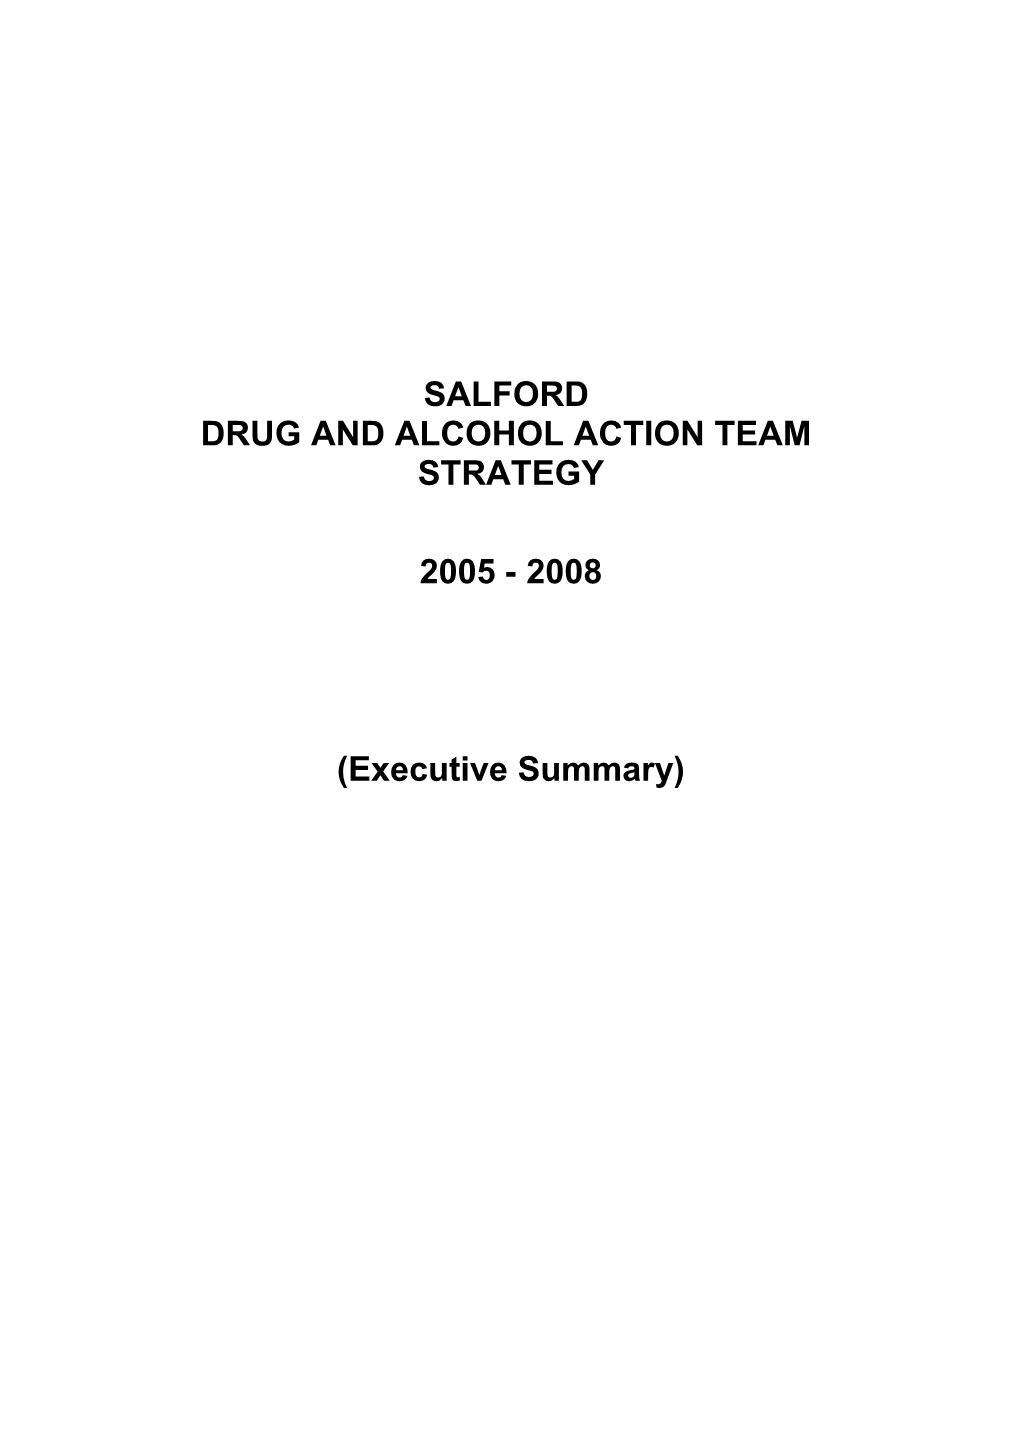 Salford Drug and Alcohol Action Team